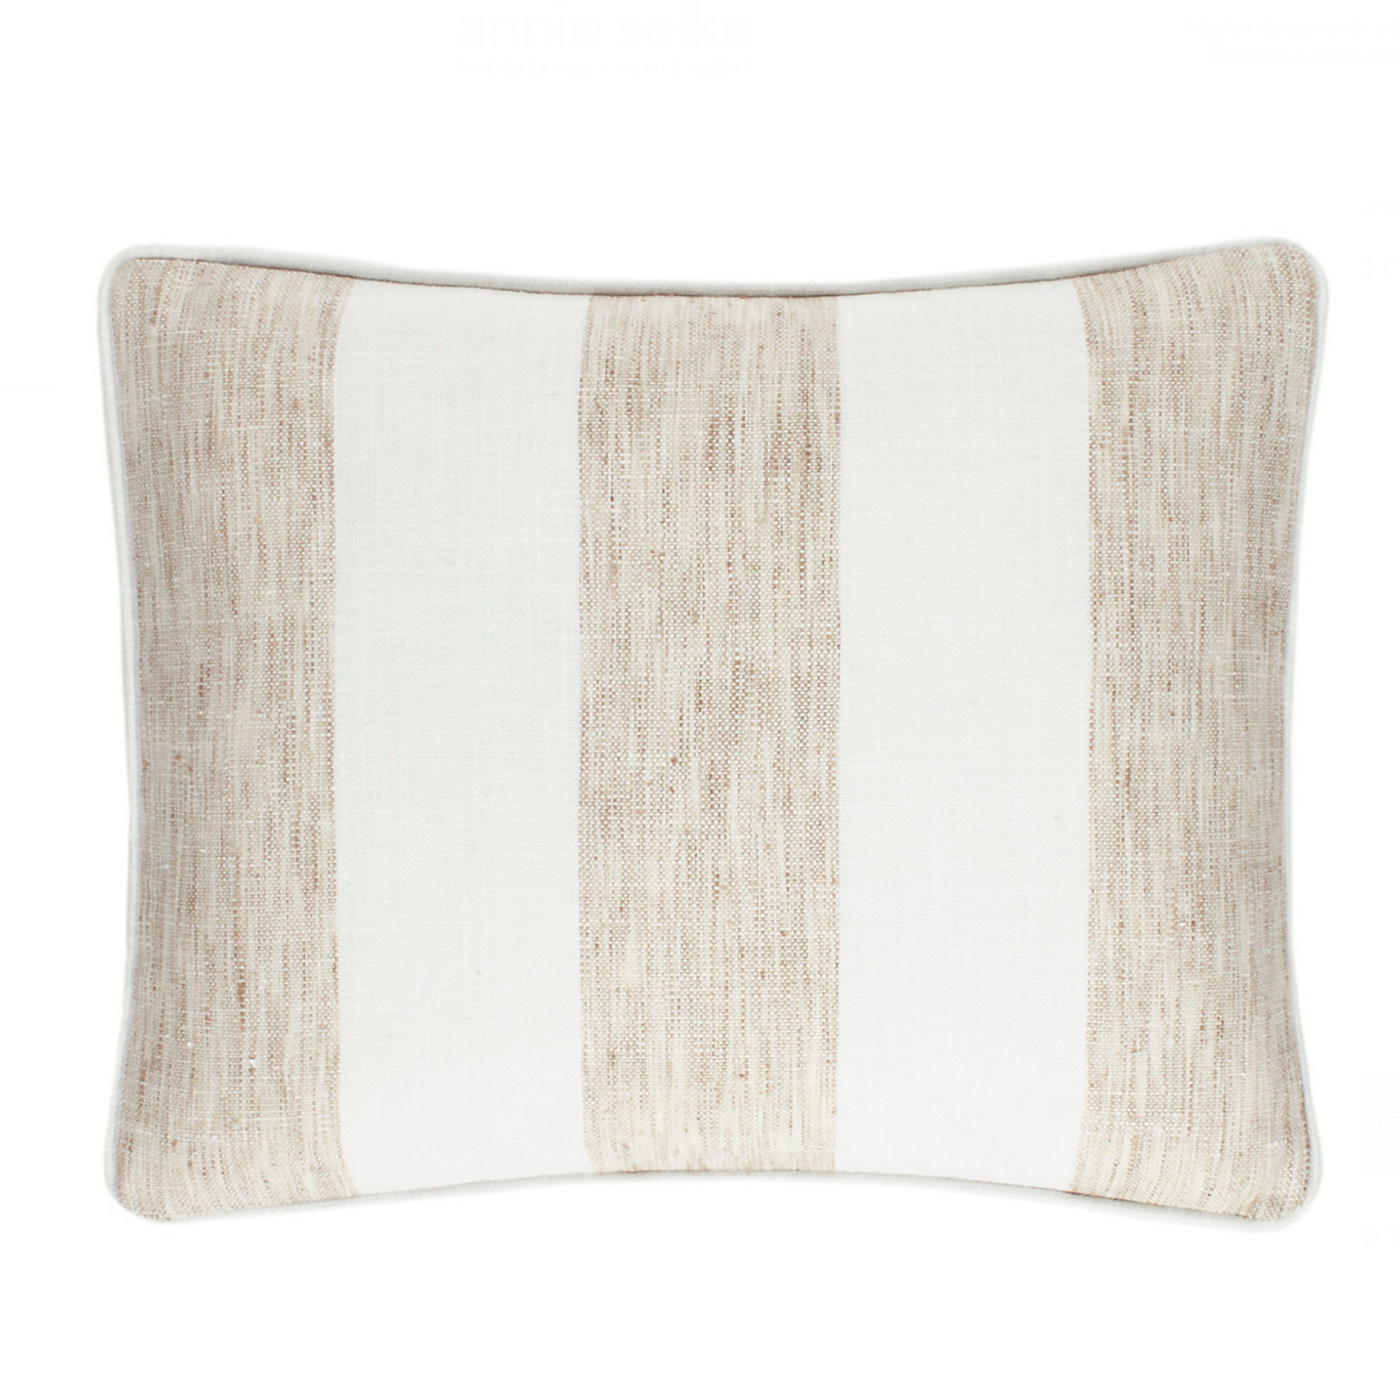 PILLOW DECORATIVE INDOOR/OUTDOOR STRIPE (Available in Colors and Sizes)